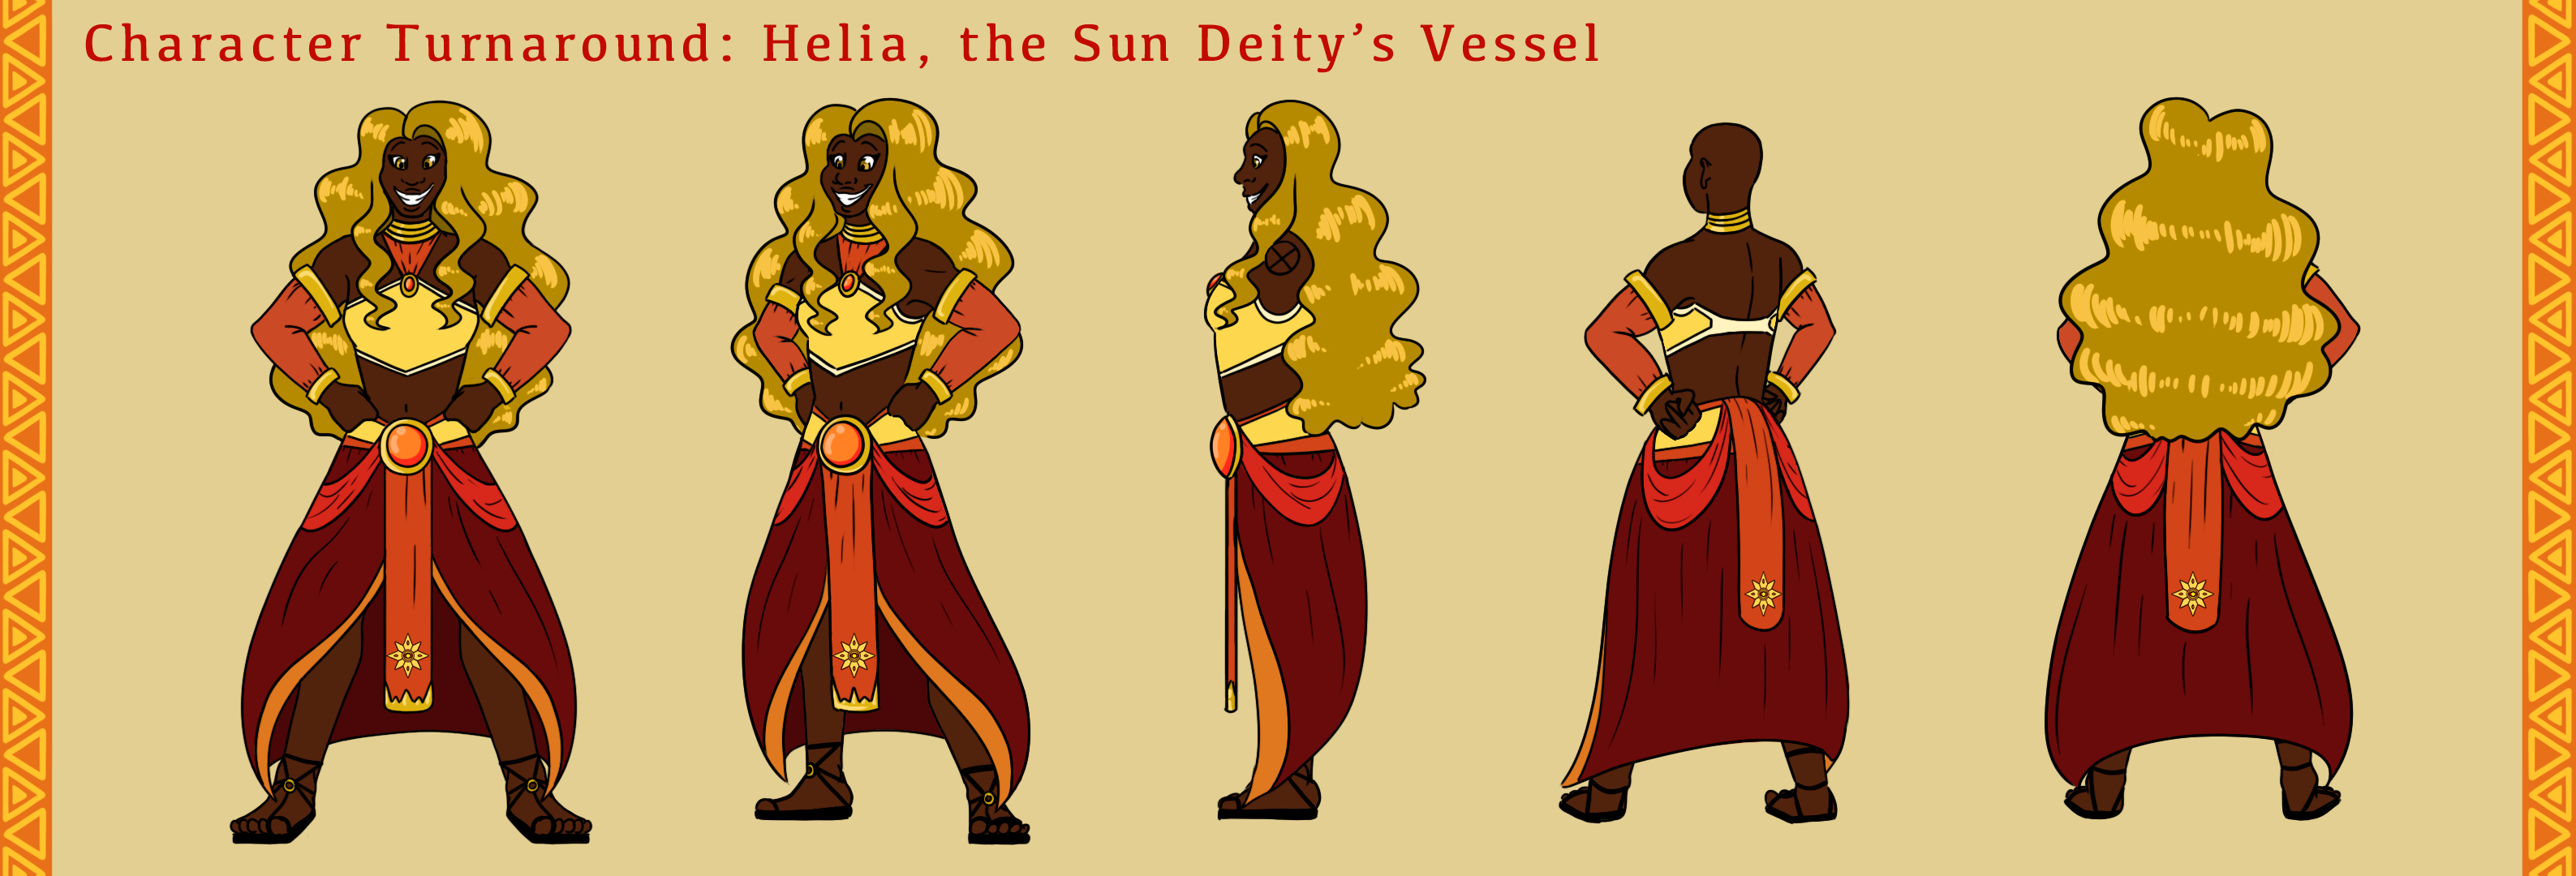  / 5-Point Turnaround of Helia, the Sun Deity's Vessel. Drawn and colored in Photoshop.